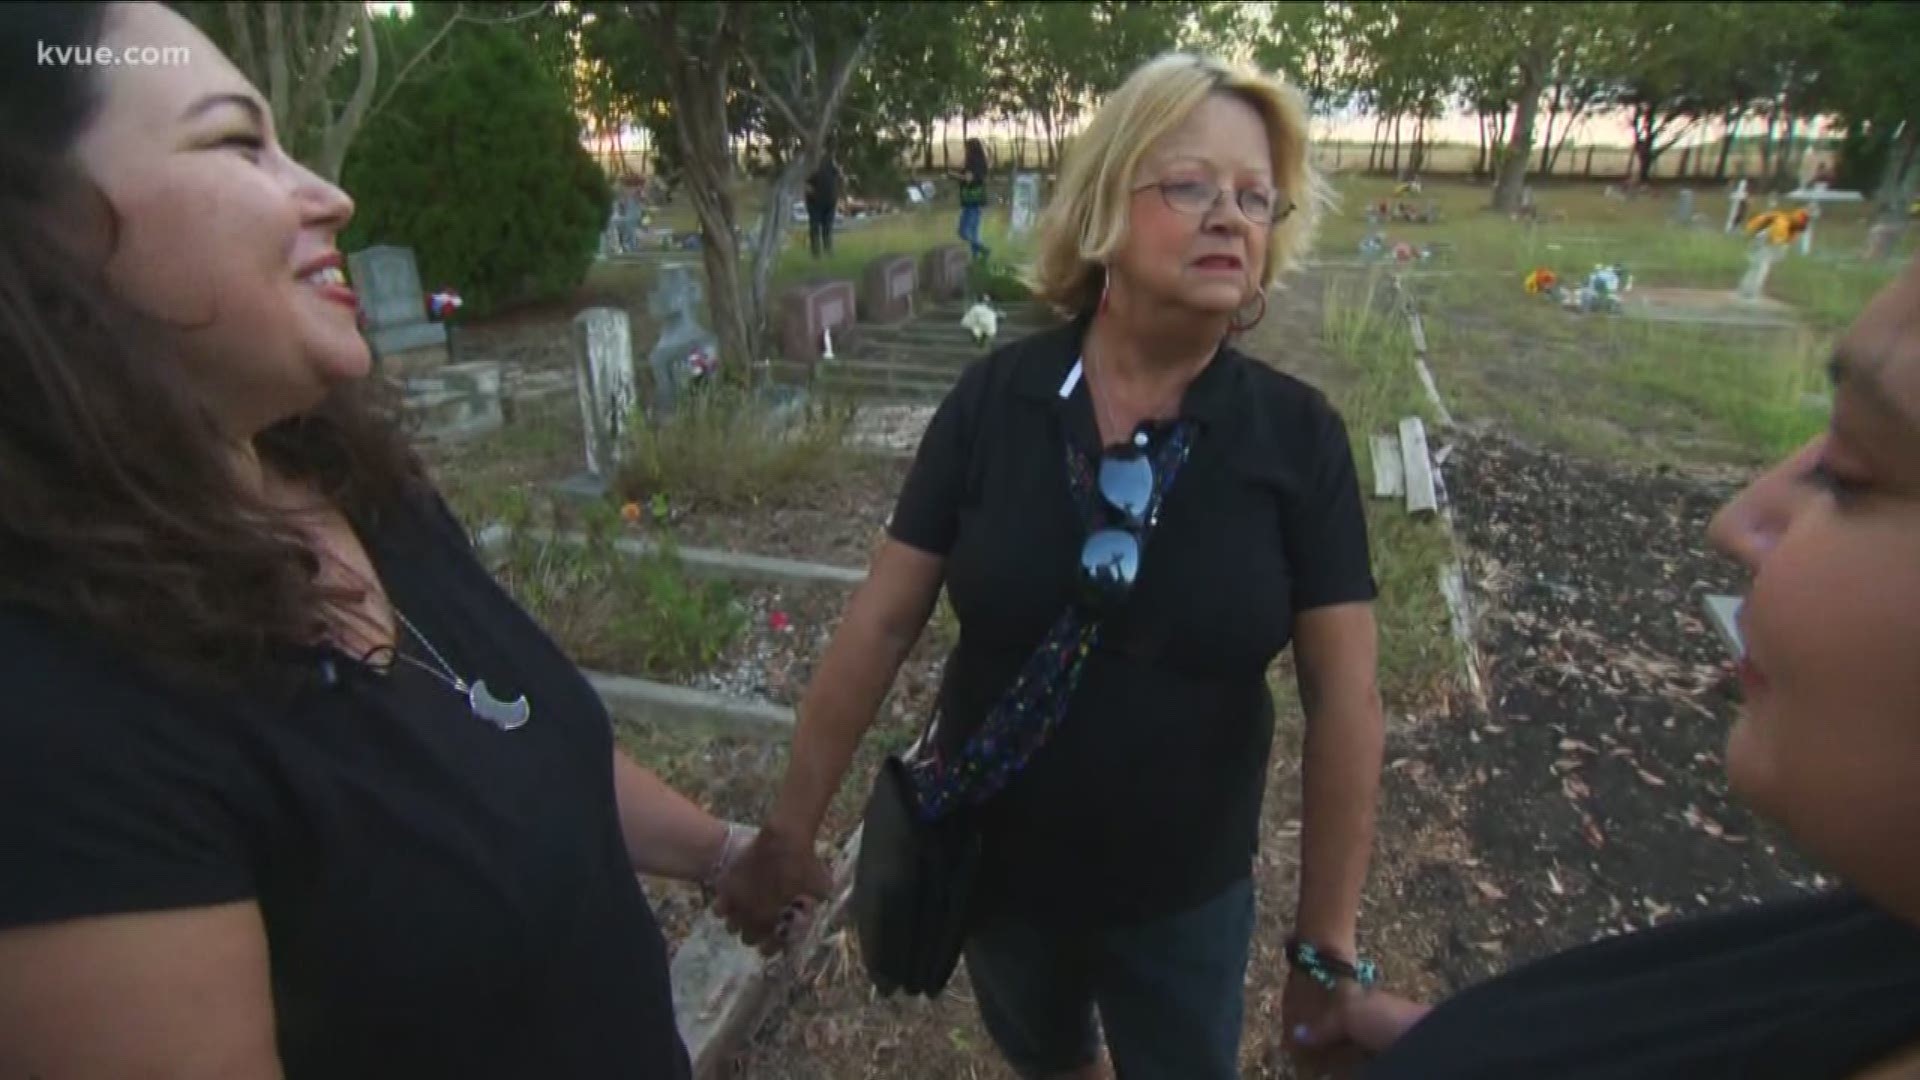 The San Marcos Area Paranormal Society heads to the graveyard to help spirits find peace.